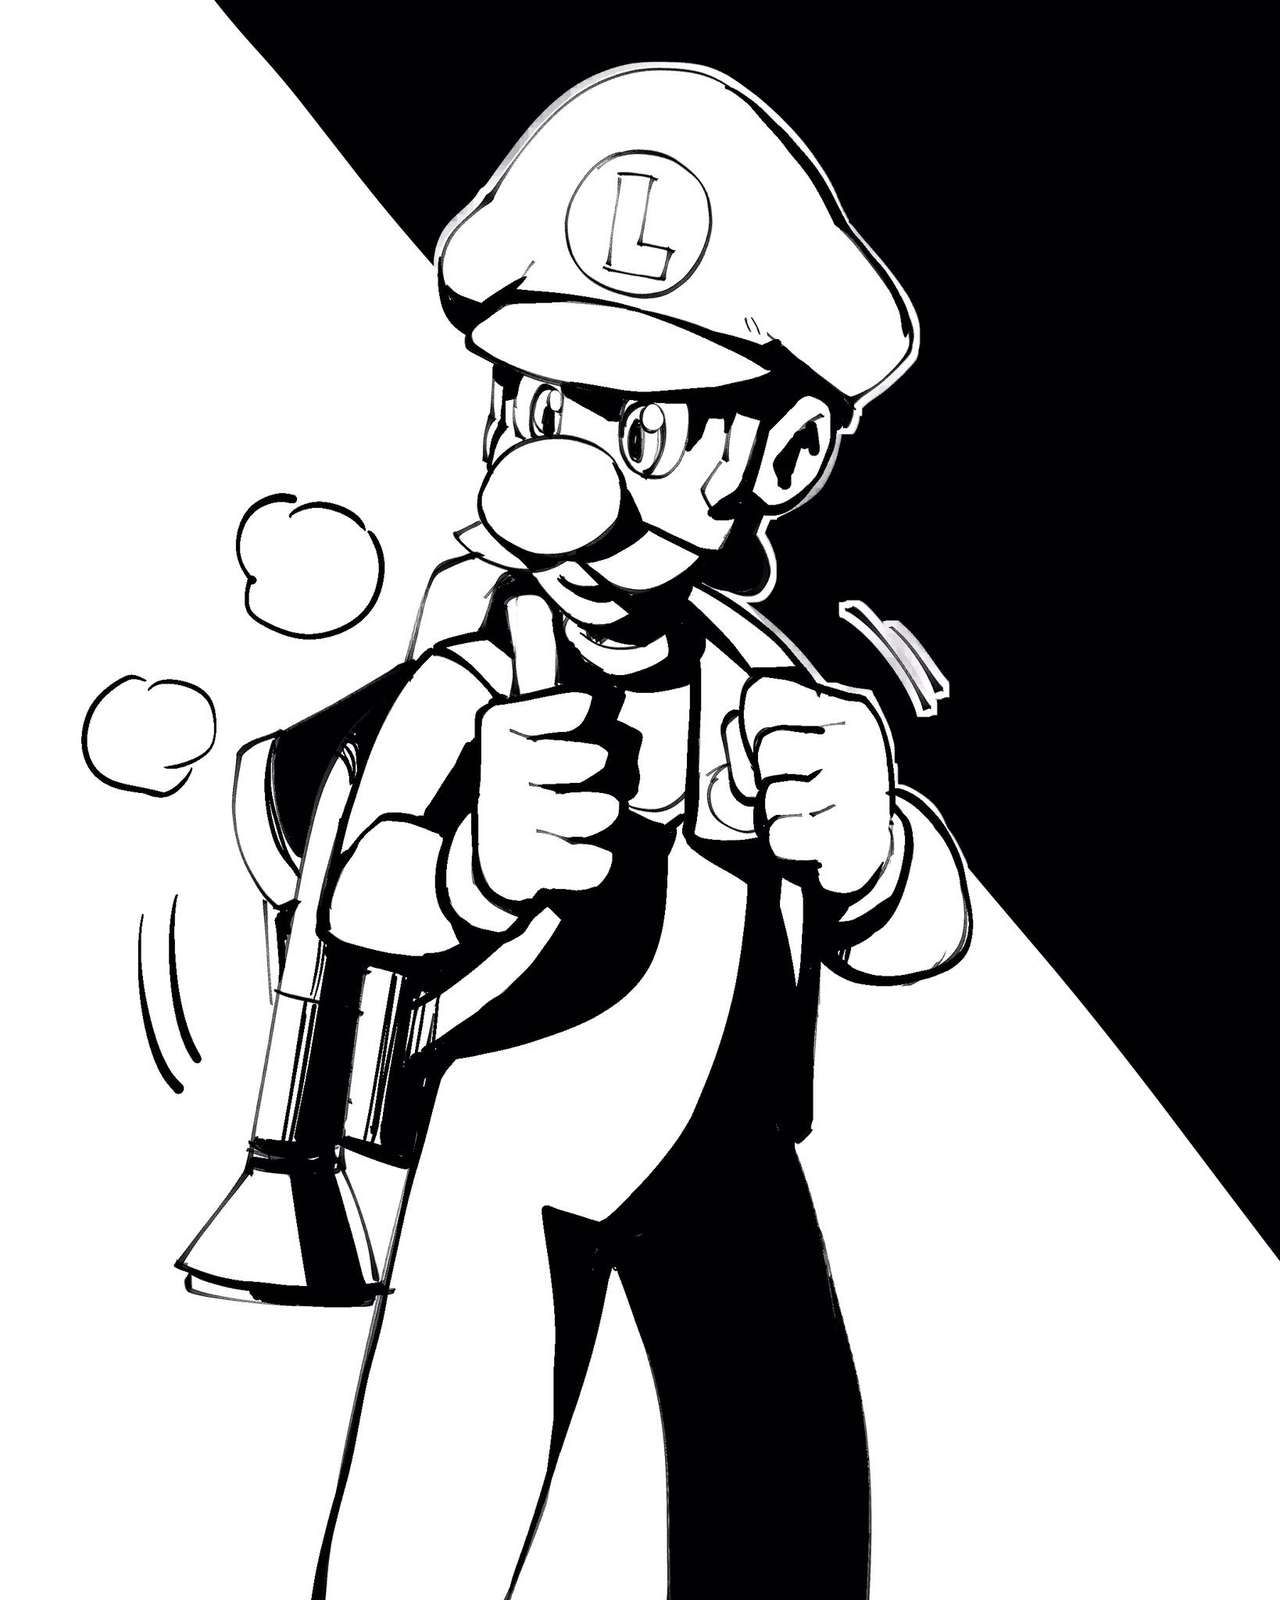 [Nisego] Inktober 2019 (Super Mario Brothers) [Ongoing] 5